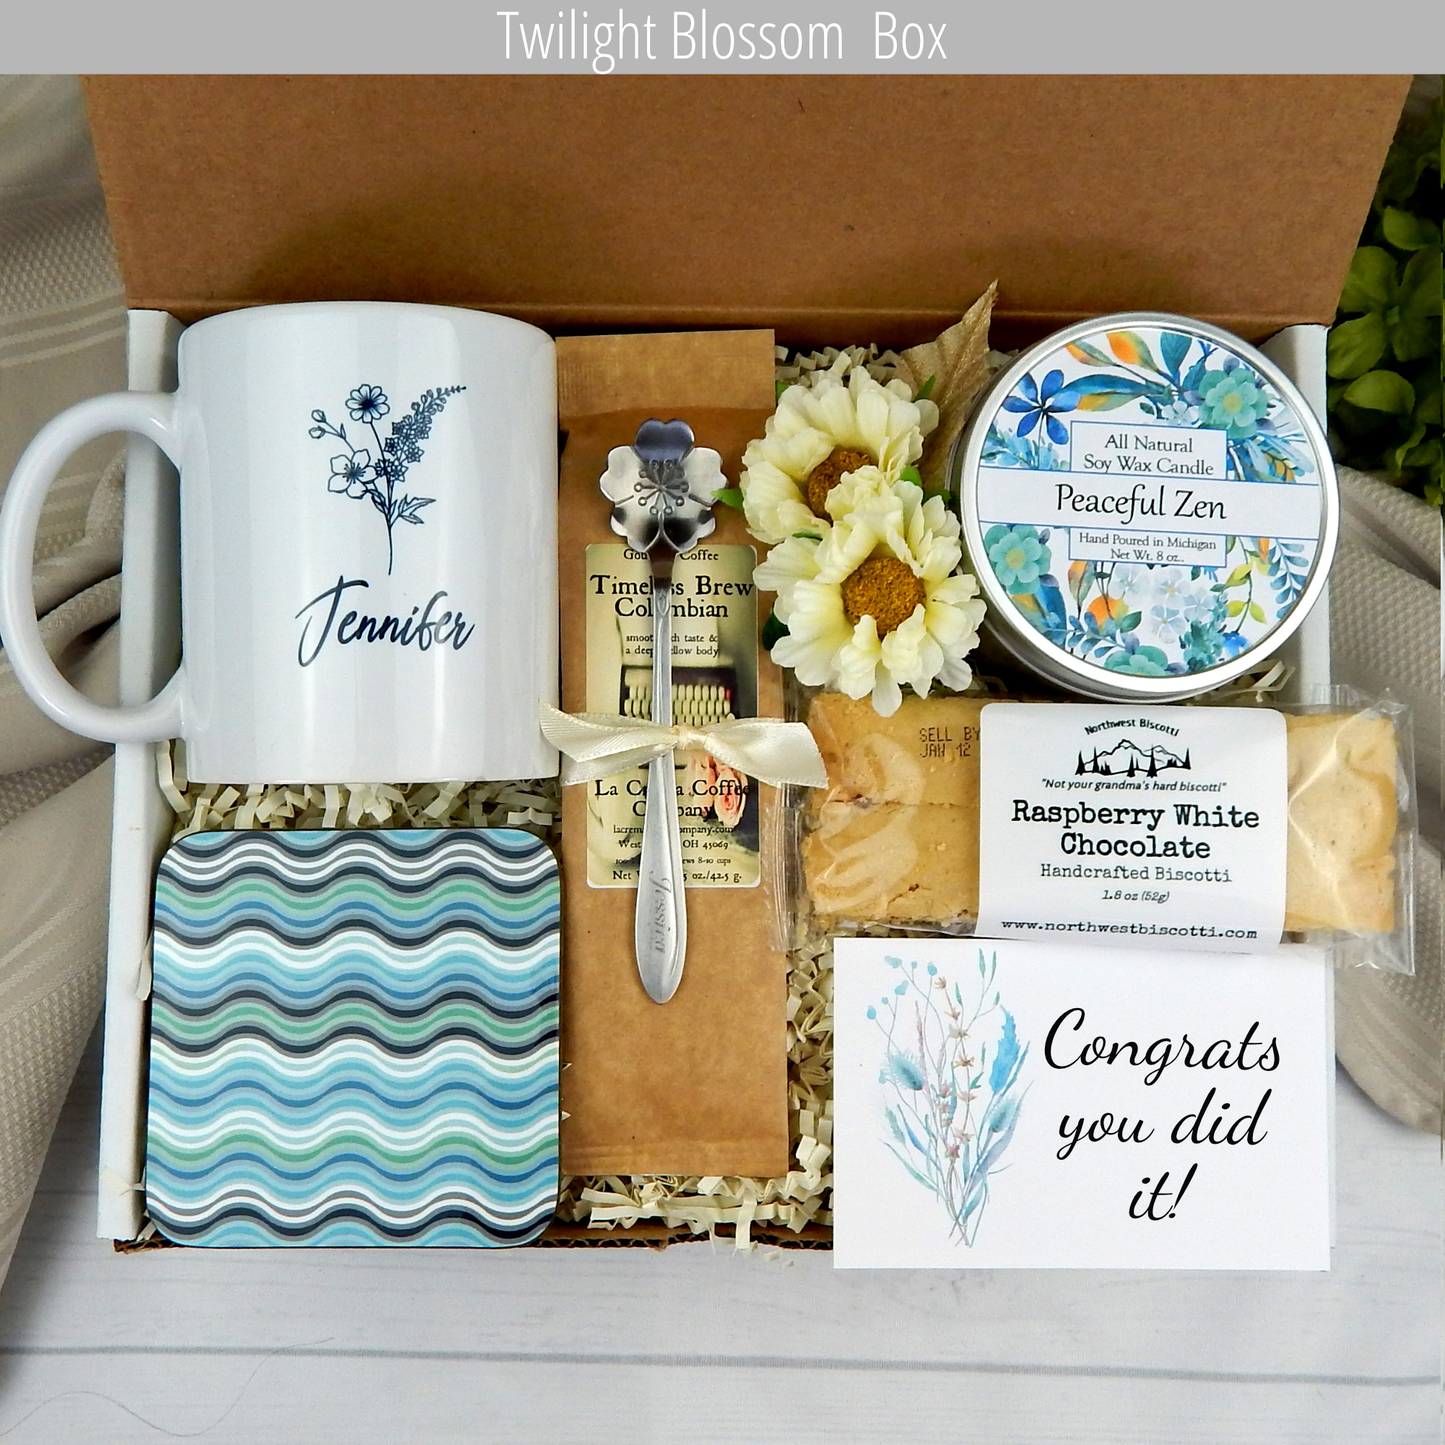 Celebrate with a congrats basket featuring personalized name mug, coffee, and goodies.